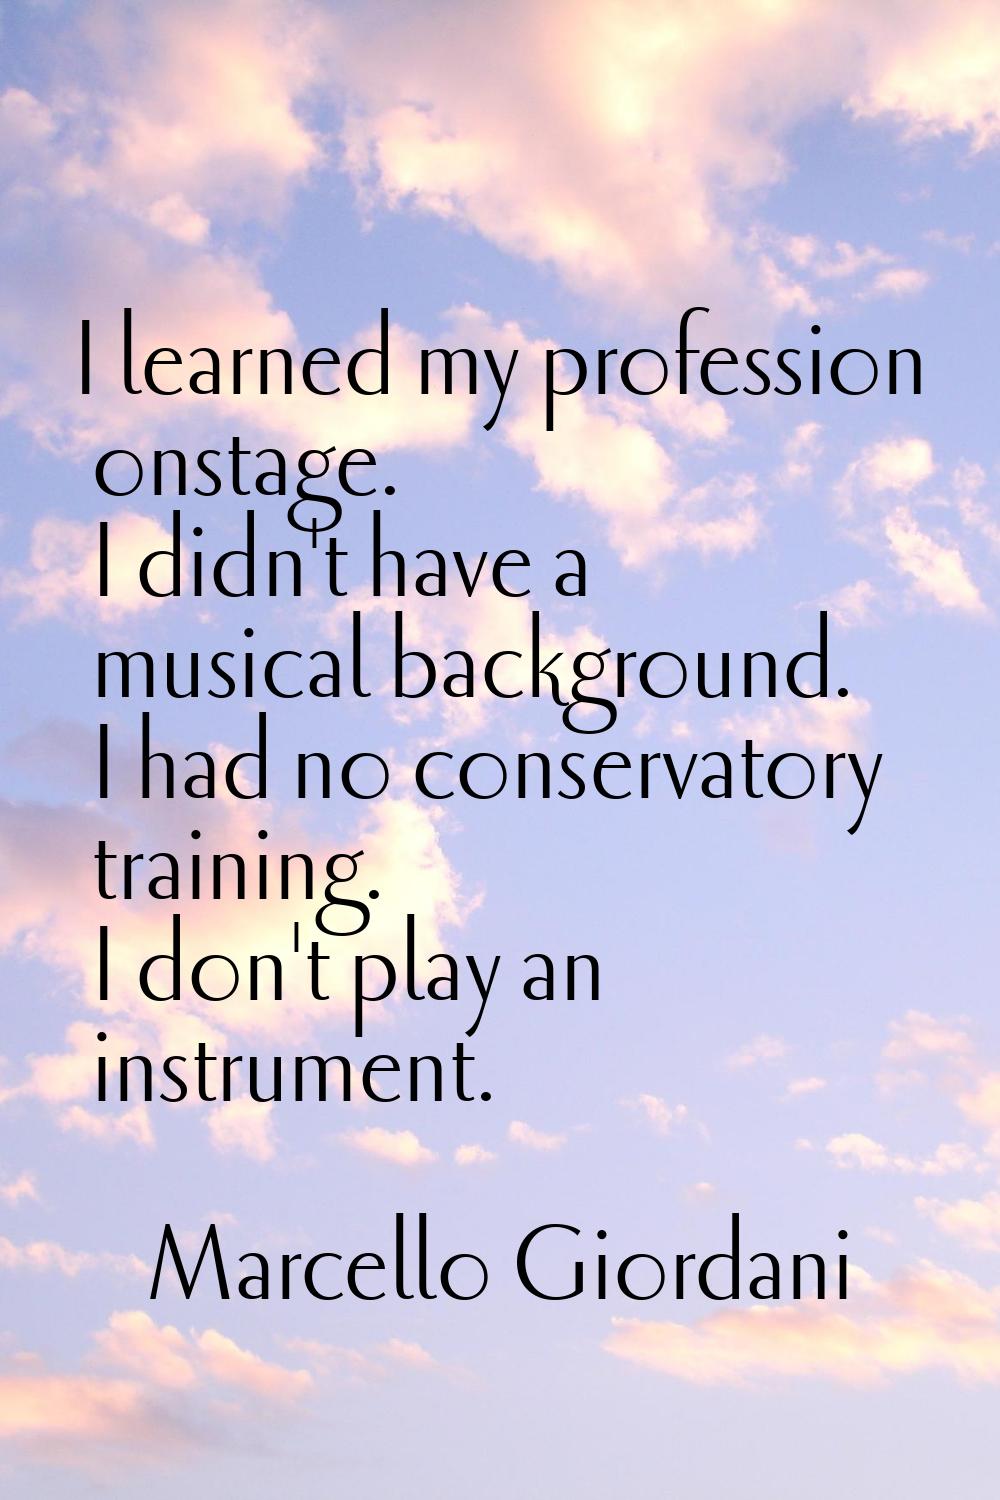 I learned my profession onstage. I didn't have a musical background. I had no conservatory training